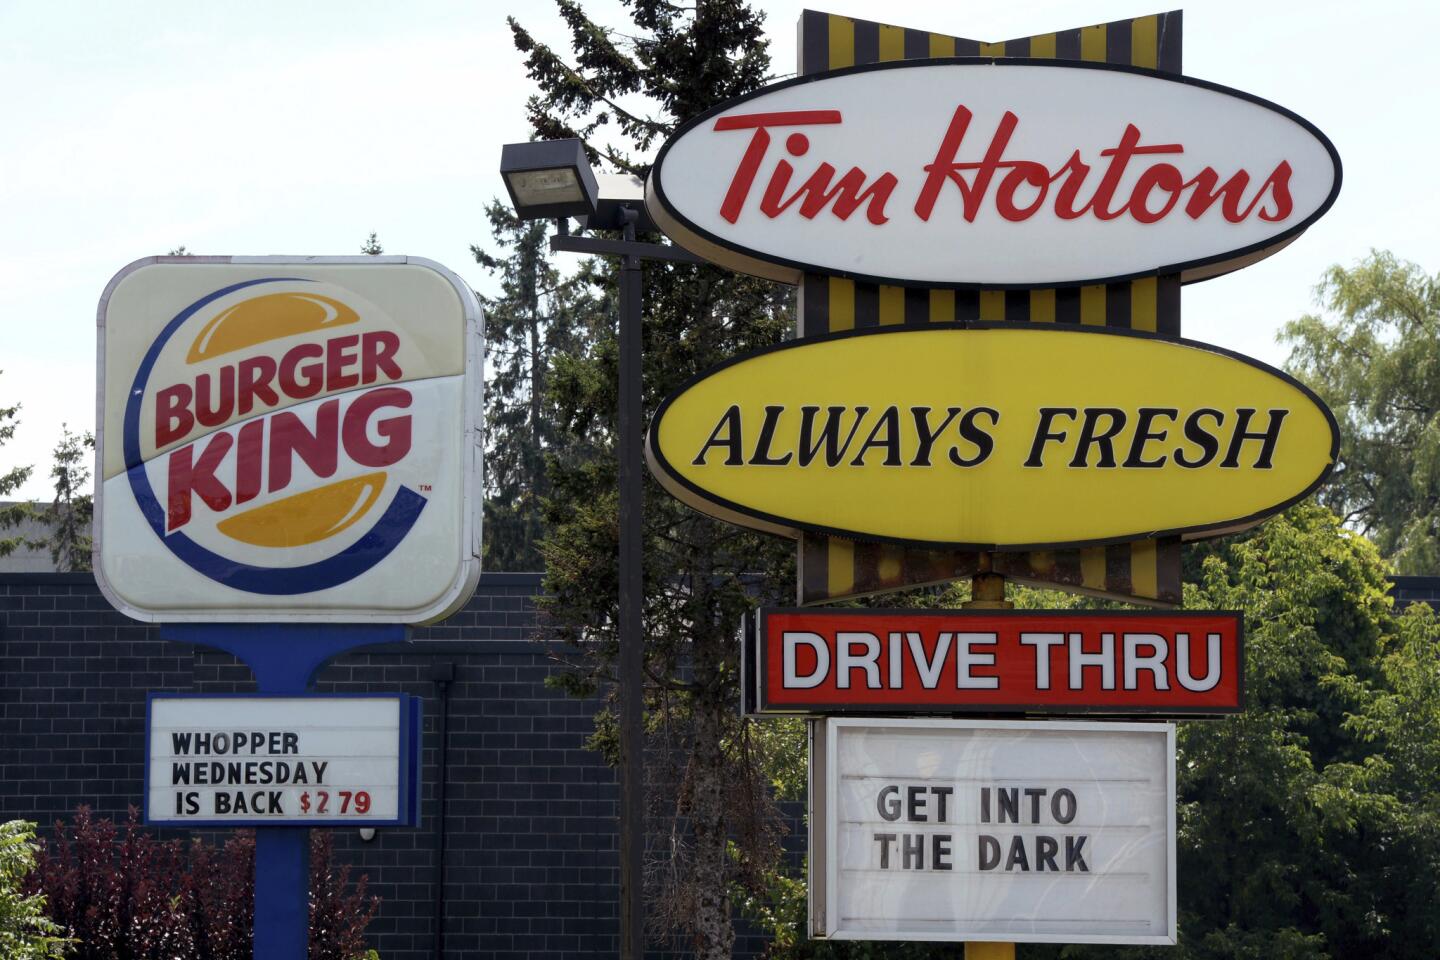 Justin Bieber almost single-handedly turned around Tim Hortons